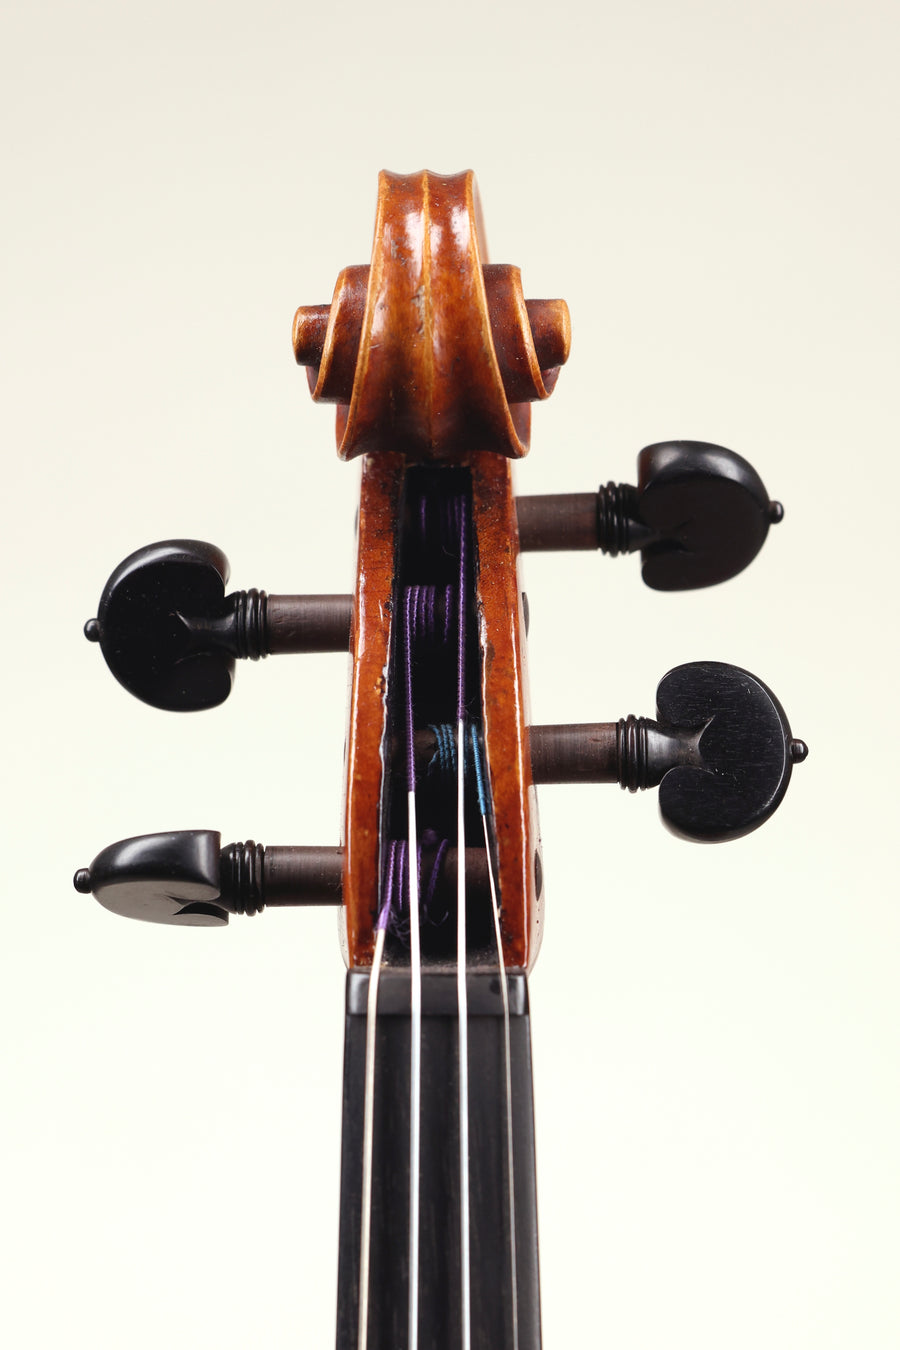 An anonymous English Violin, Approximately 1880.